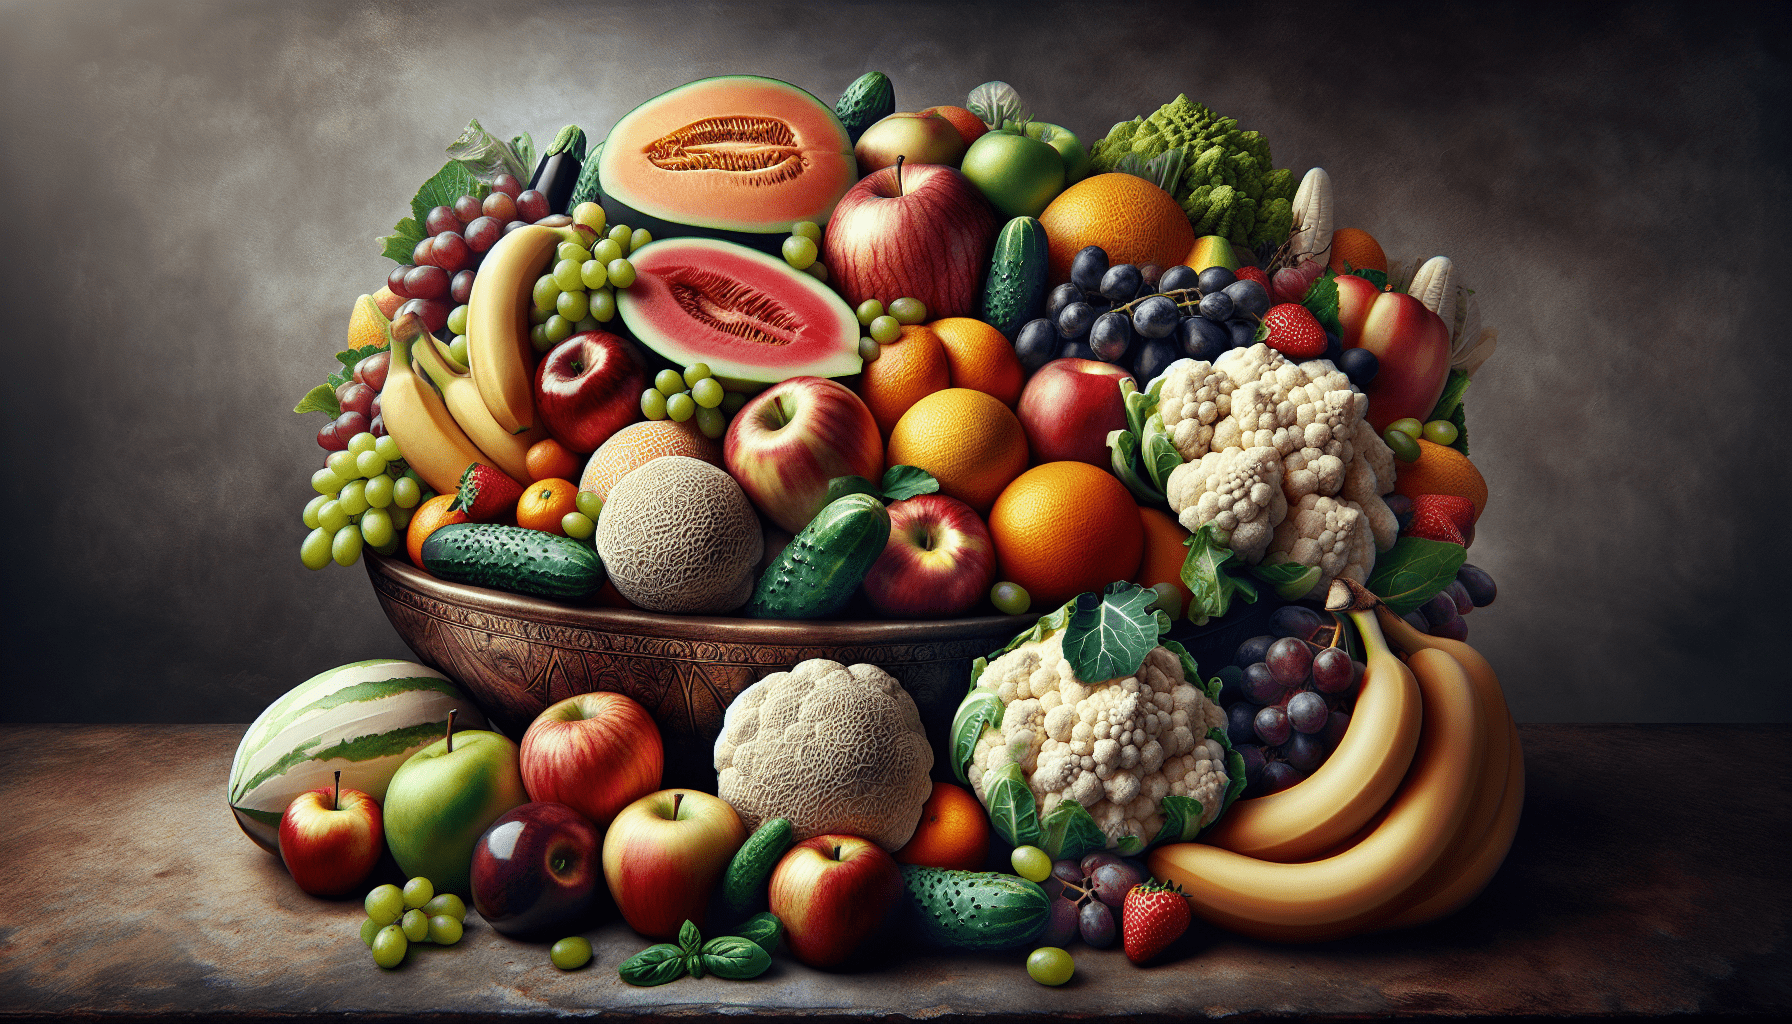 What Is The Recommended Intake Of Fruits And Vegetables For Fitness?